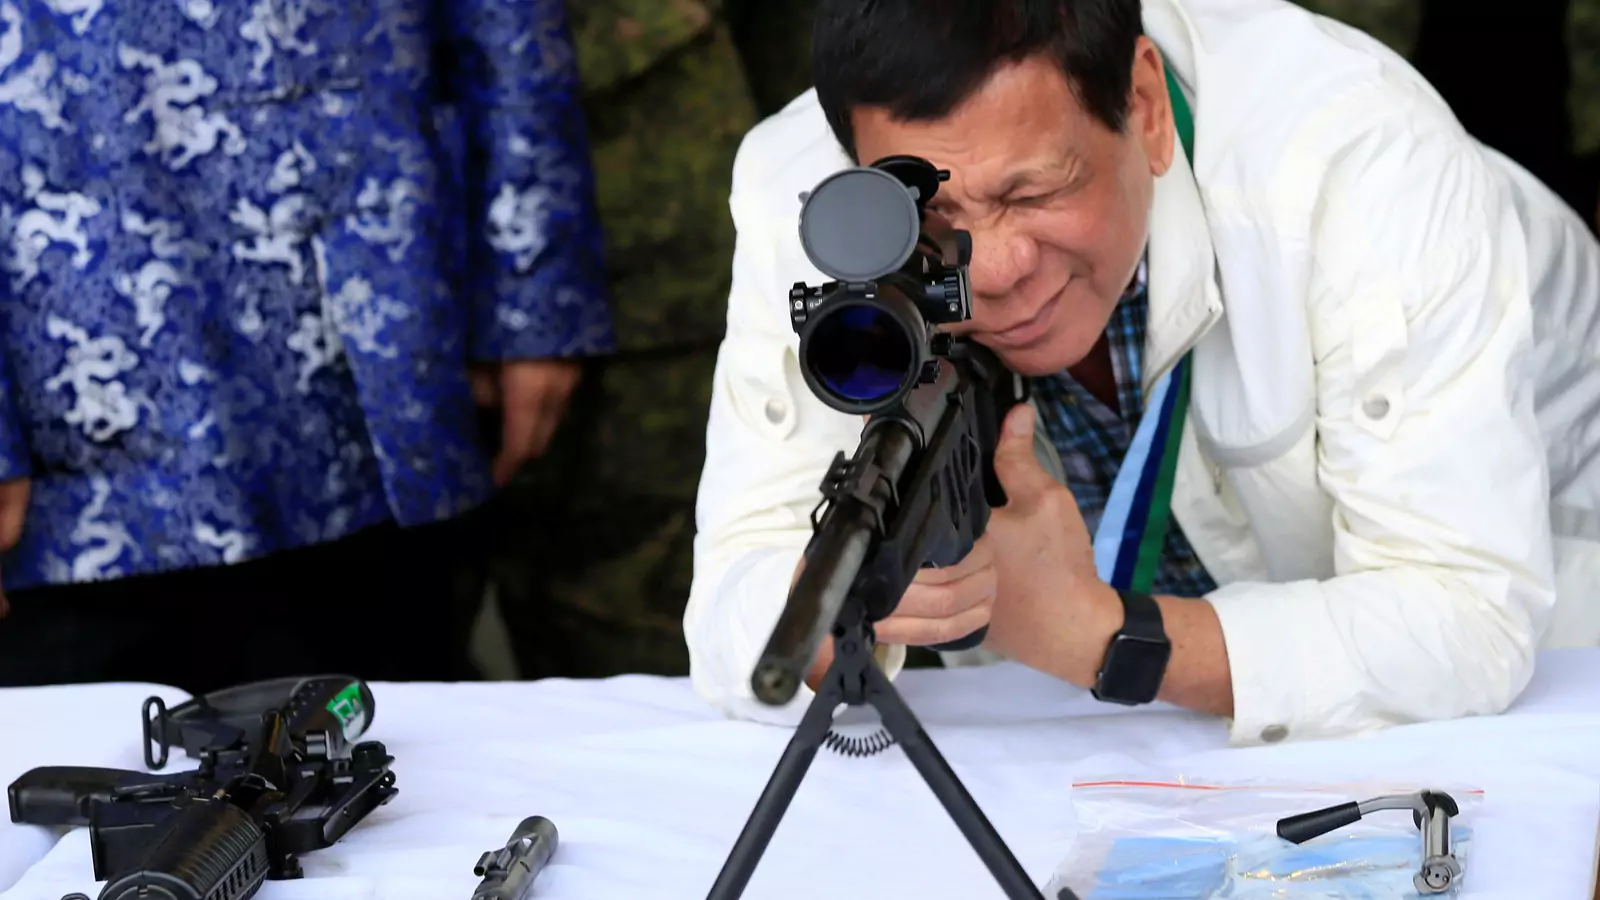 Philippine President Rodrigo Duterte checks the scope of a 7.62mm sniper rifle during the turnover ceremony of China's urgent military assistance given "gratis" to the Philippines, at Clark Air Base, near Angeles City, Philippines, on June 28, 2017. 